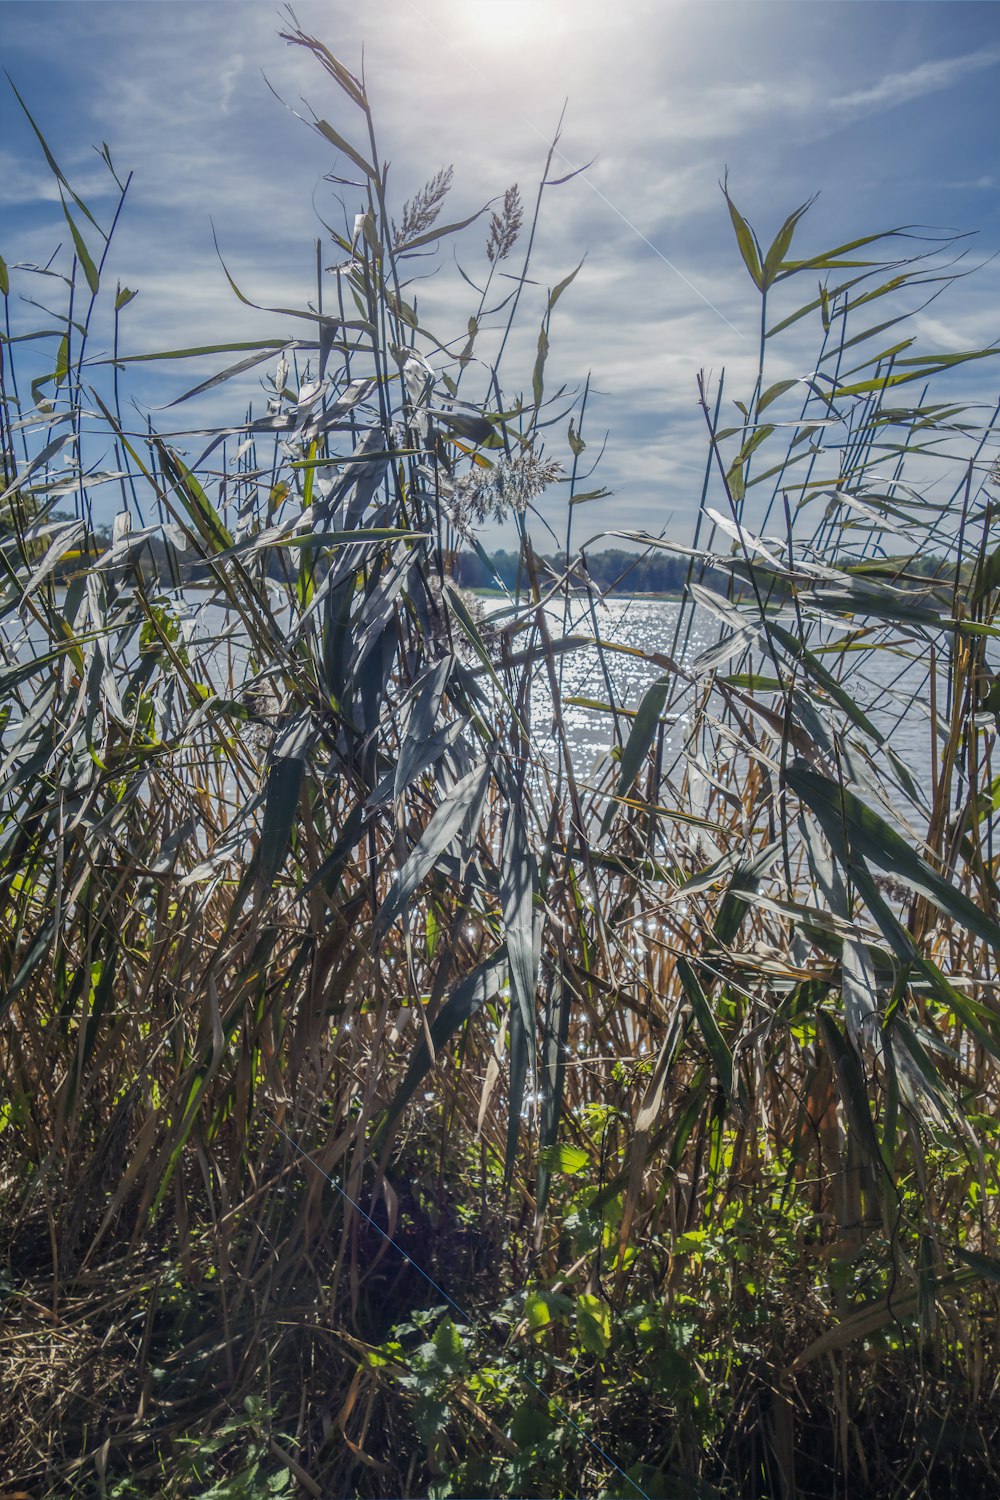 the sun shines through the tall grass by the water